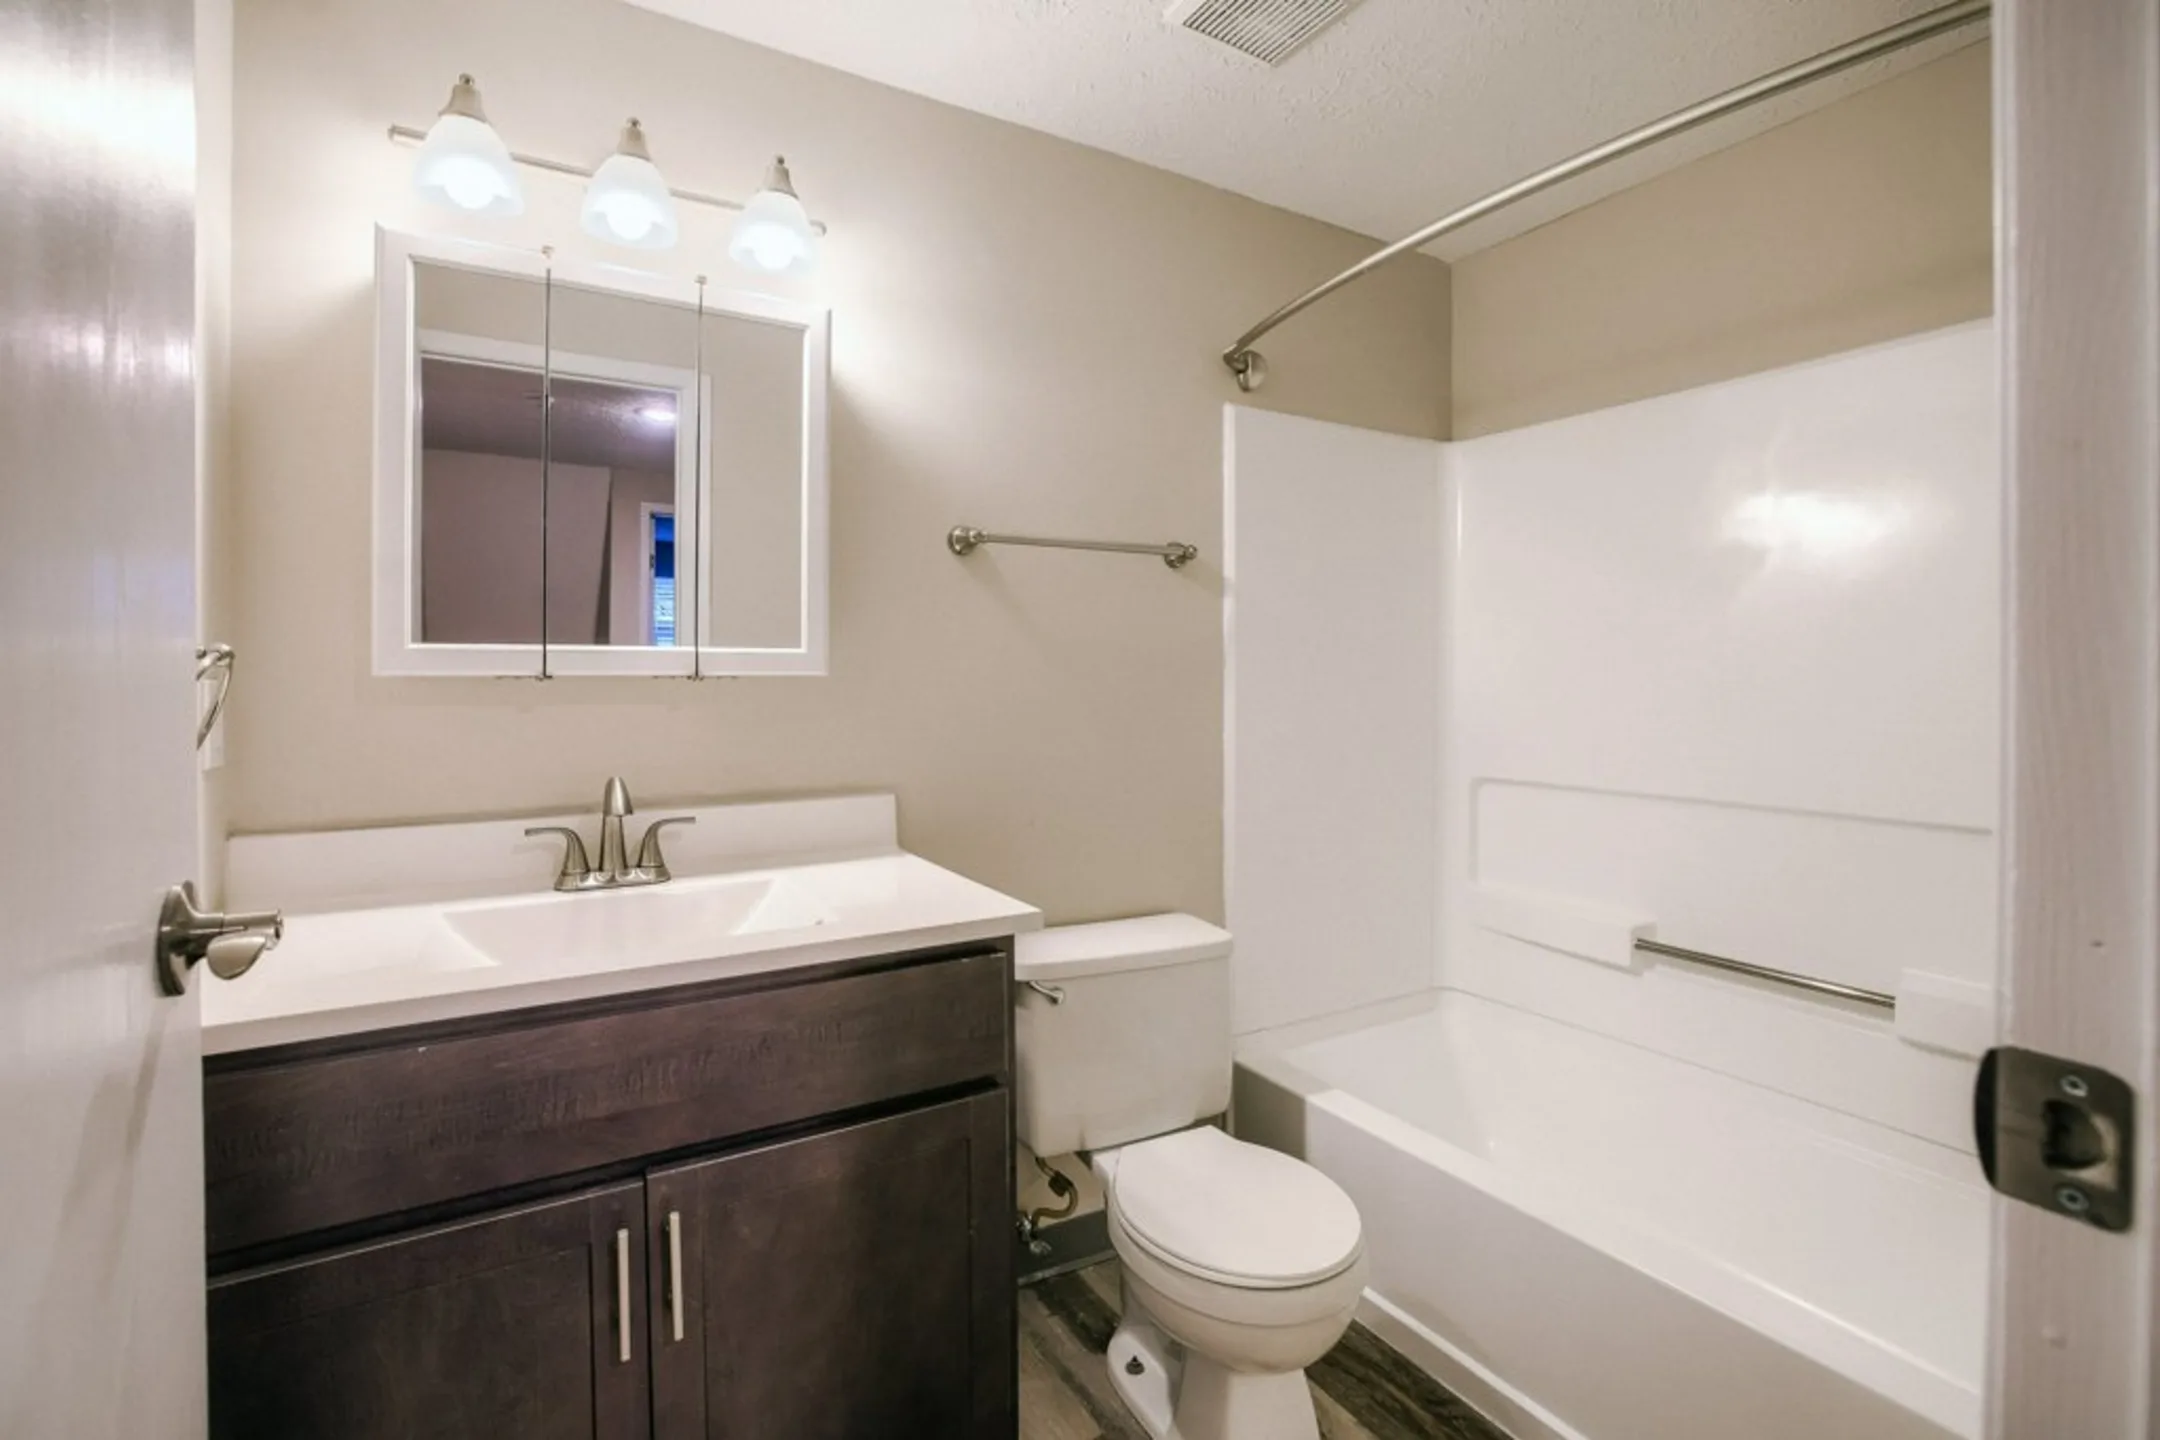 Bathroom - Townhomes at McNaughten - Columbus, OH